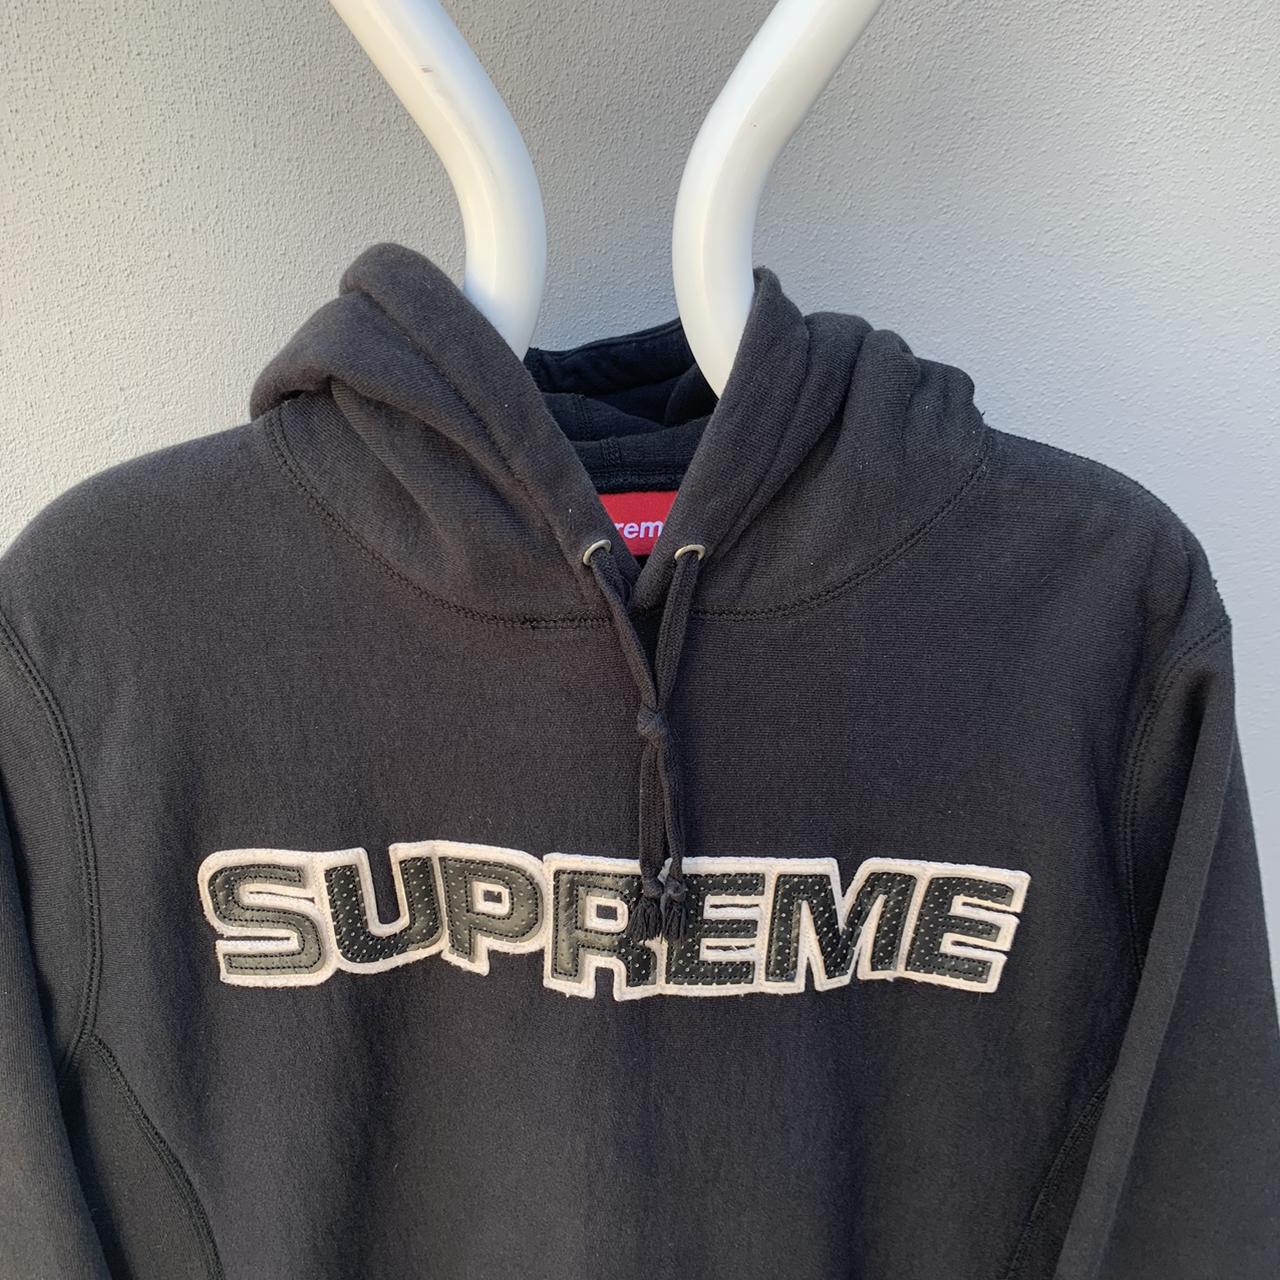 Supreme Perforated Leather Black Hoodie Size on... - Depop